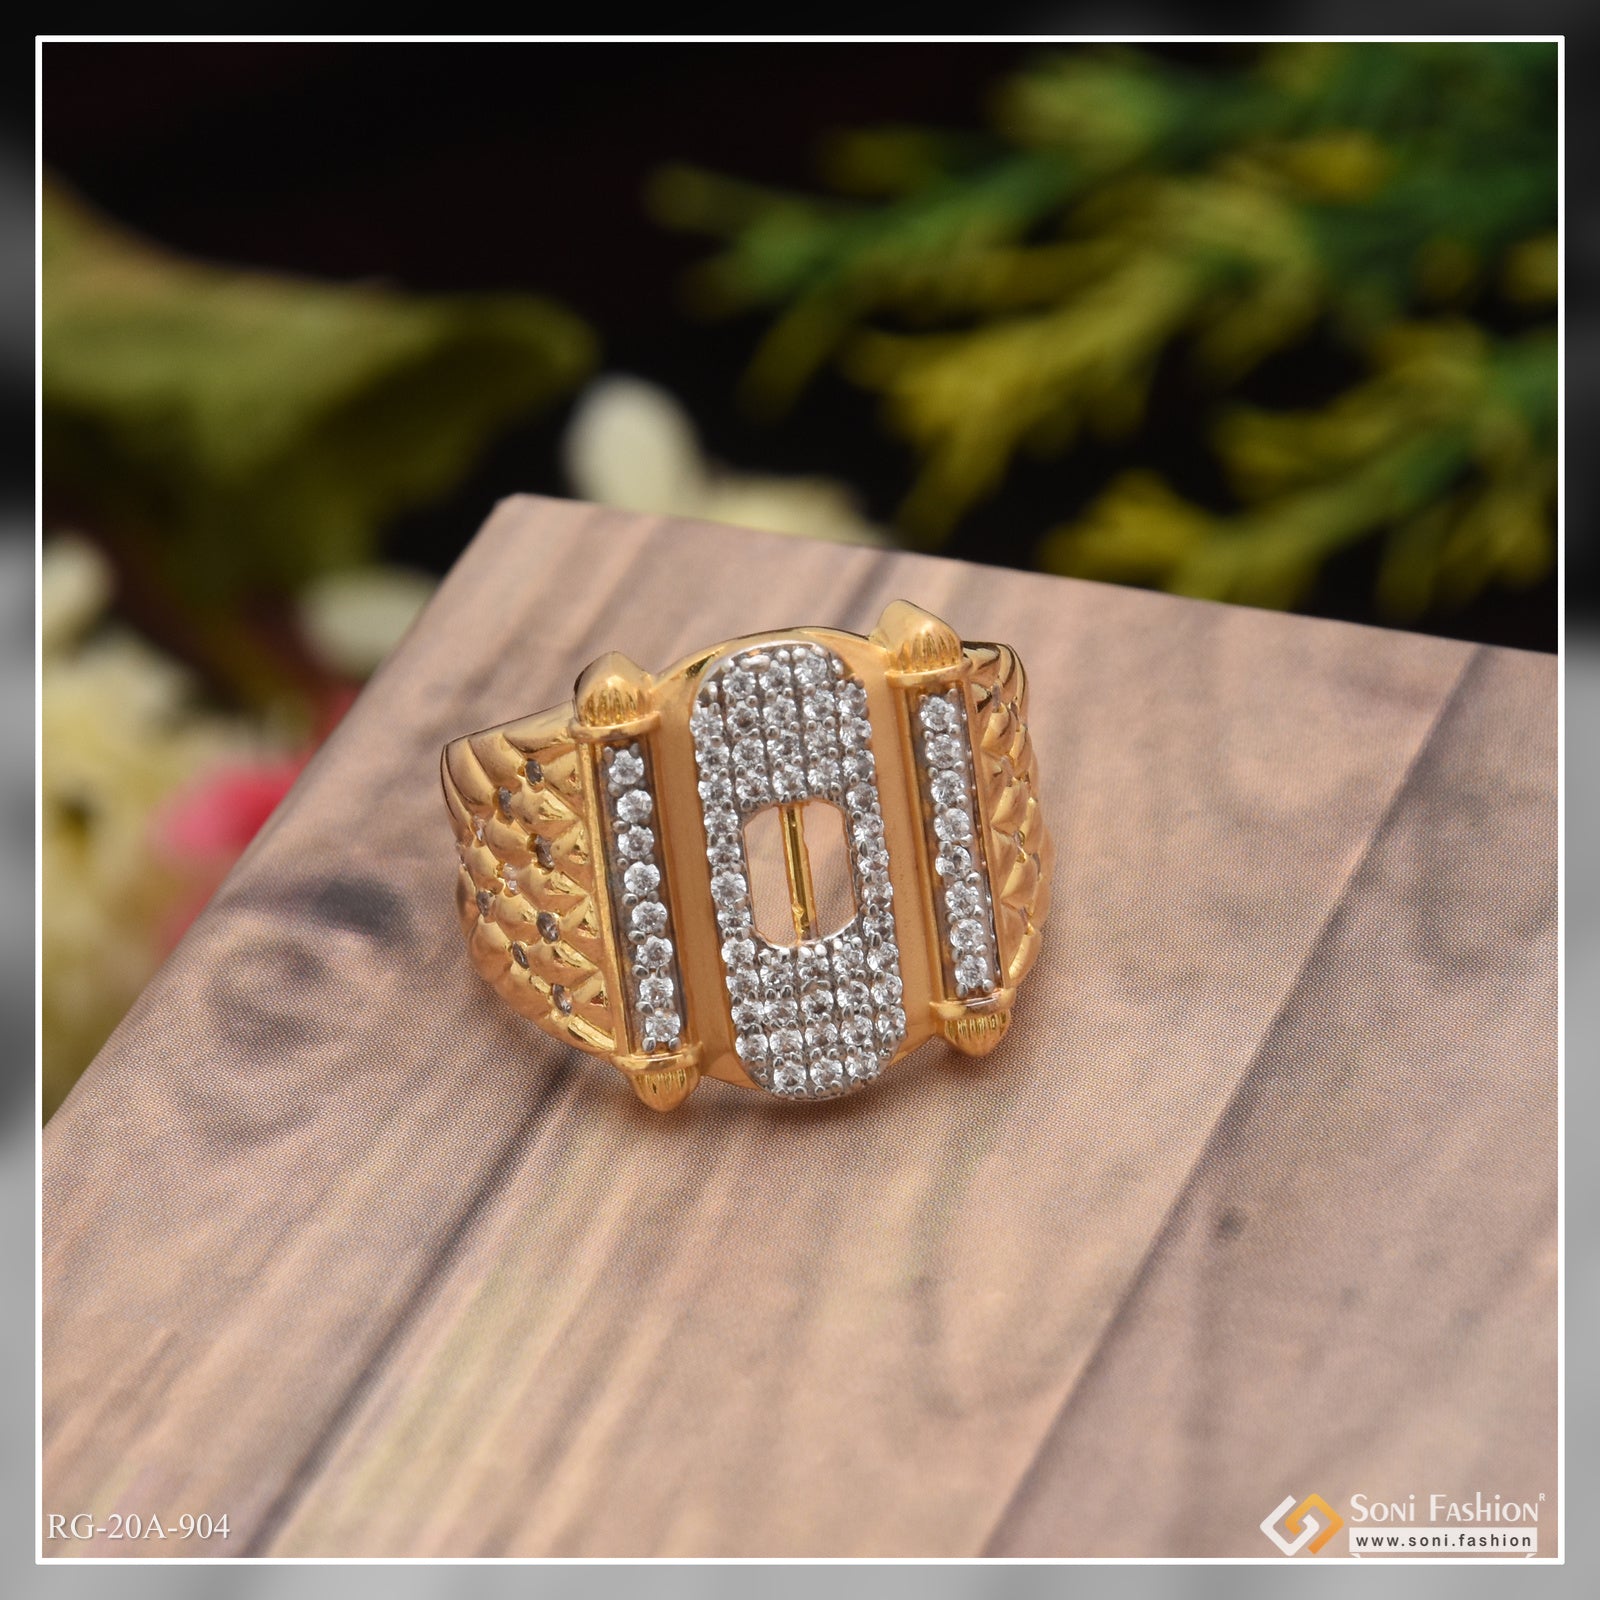 1 Gram Gold Forming Attention-Getting Design with Diamond Ring for Men - Style A904